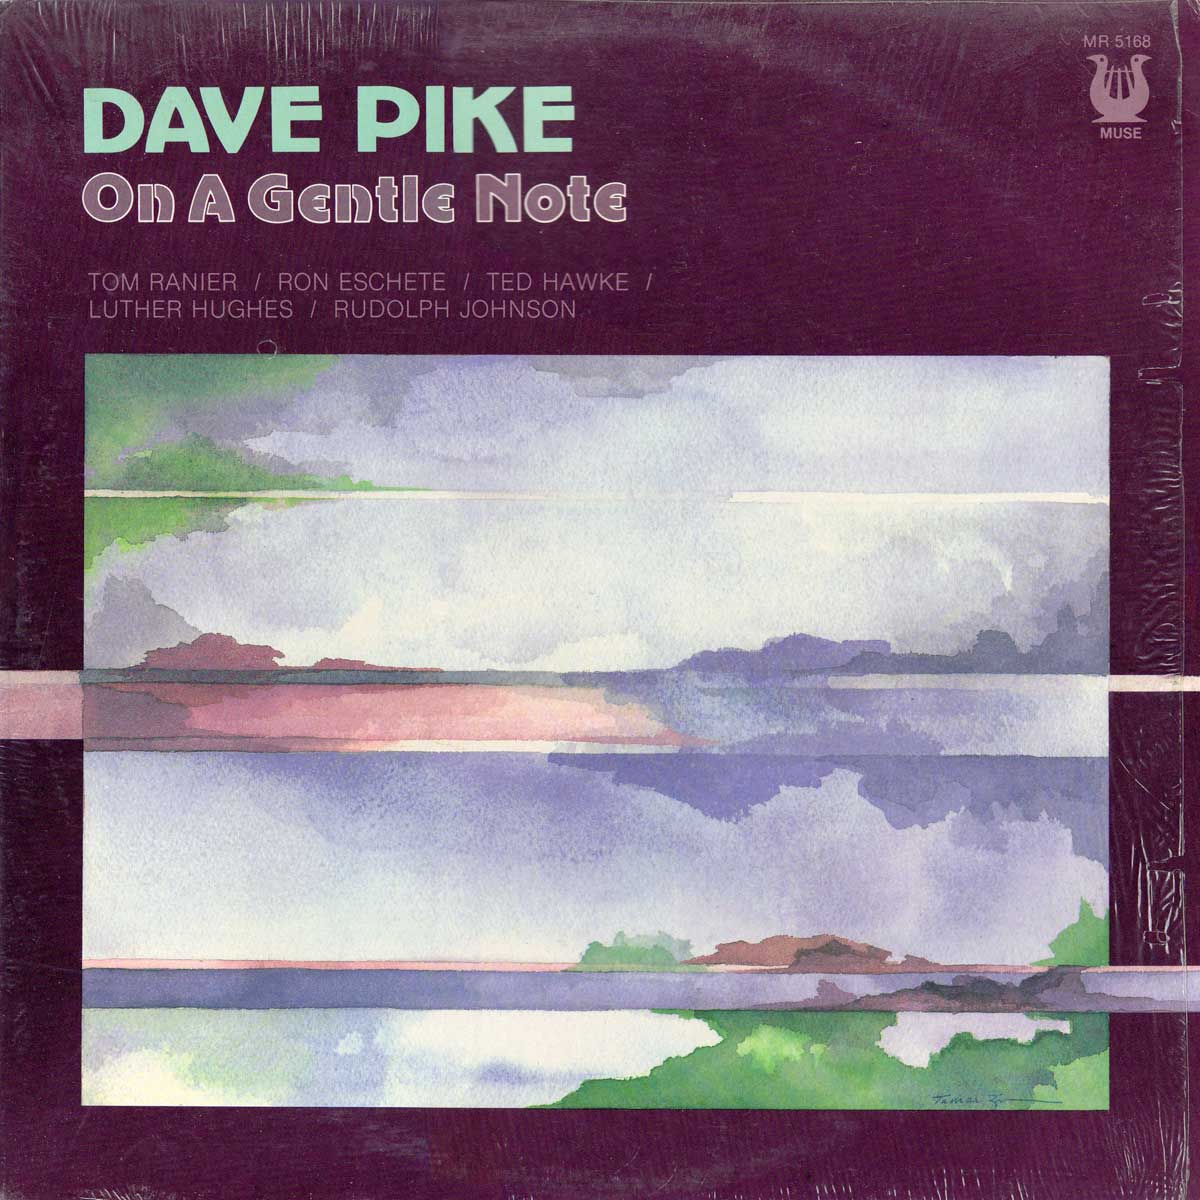 Dave Pike - On A Gentle Note - Front cover